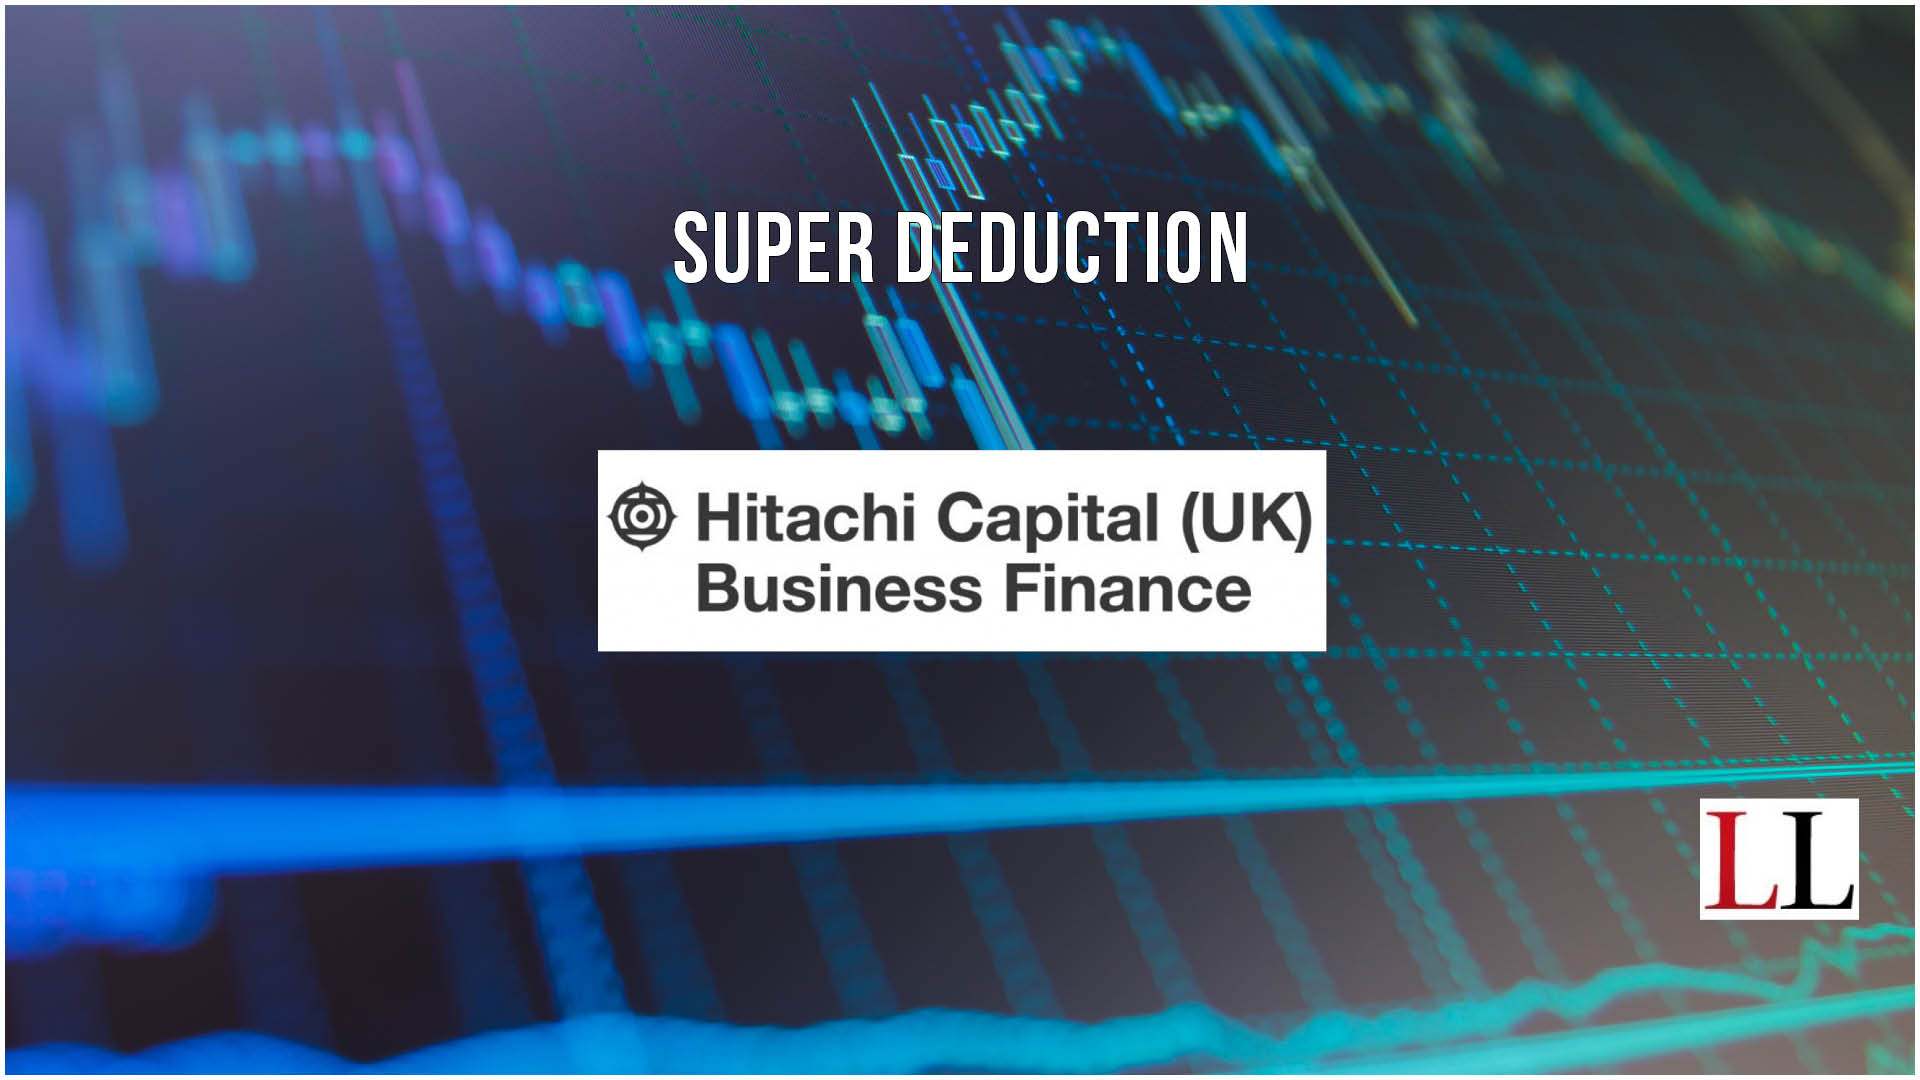 Hitachi Capital Business Finance targets brokers with Super Deduction event